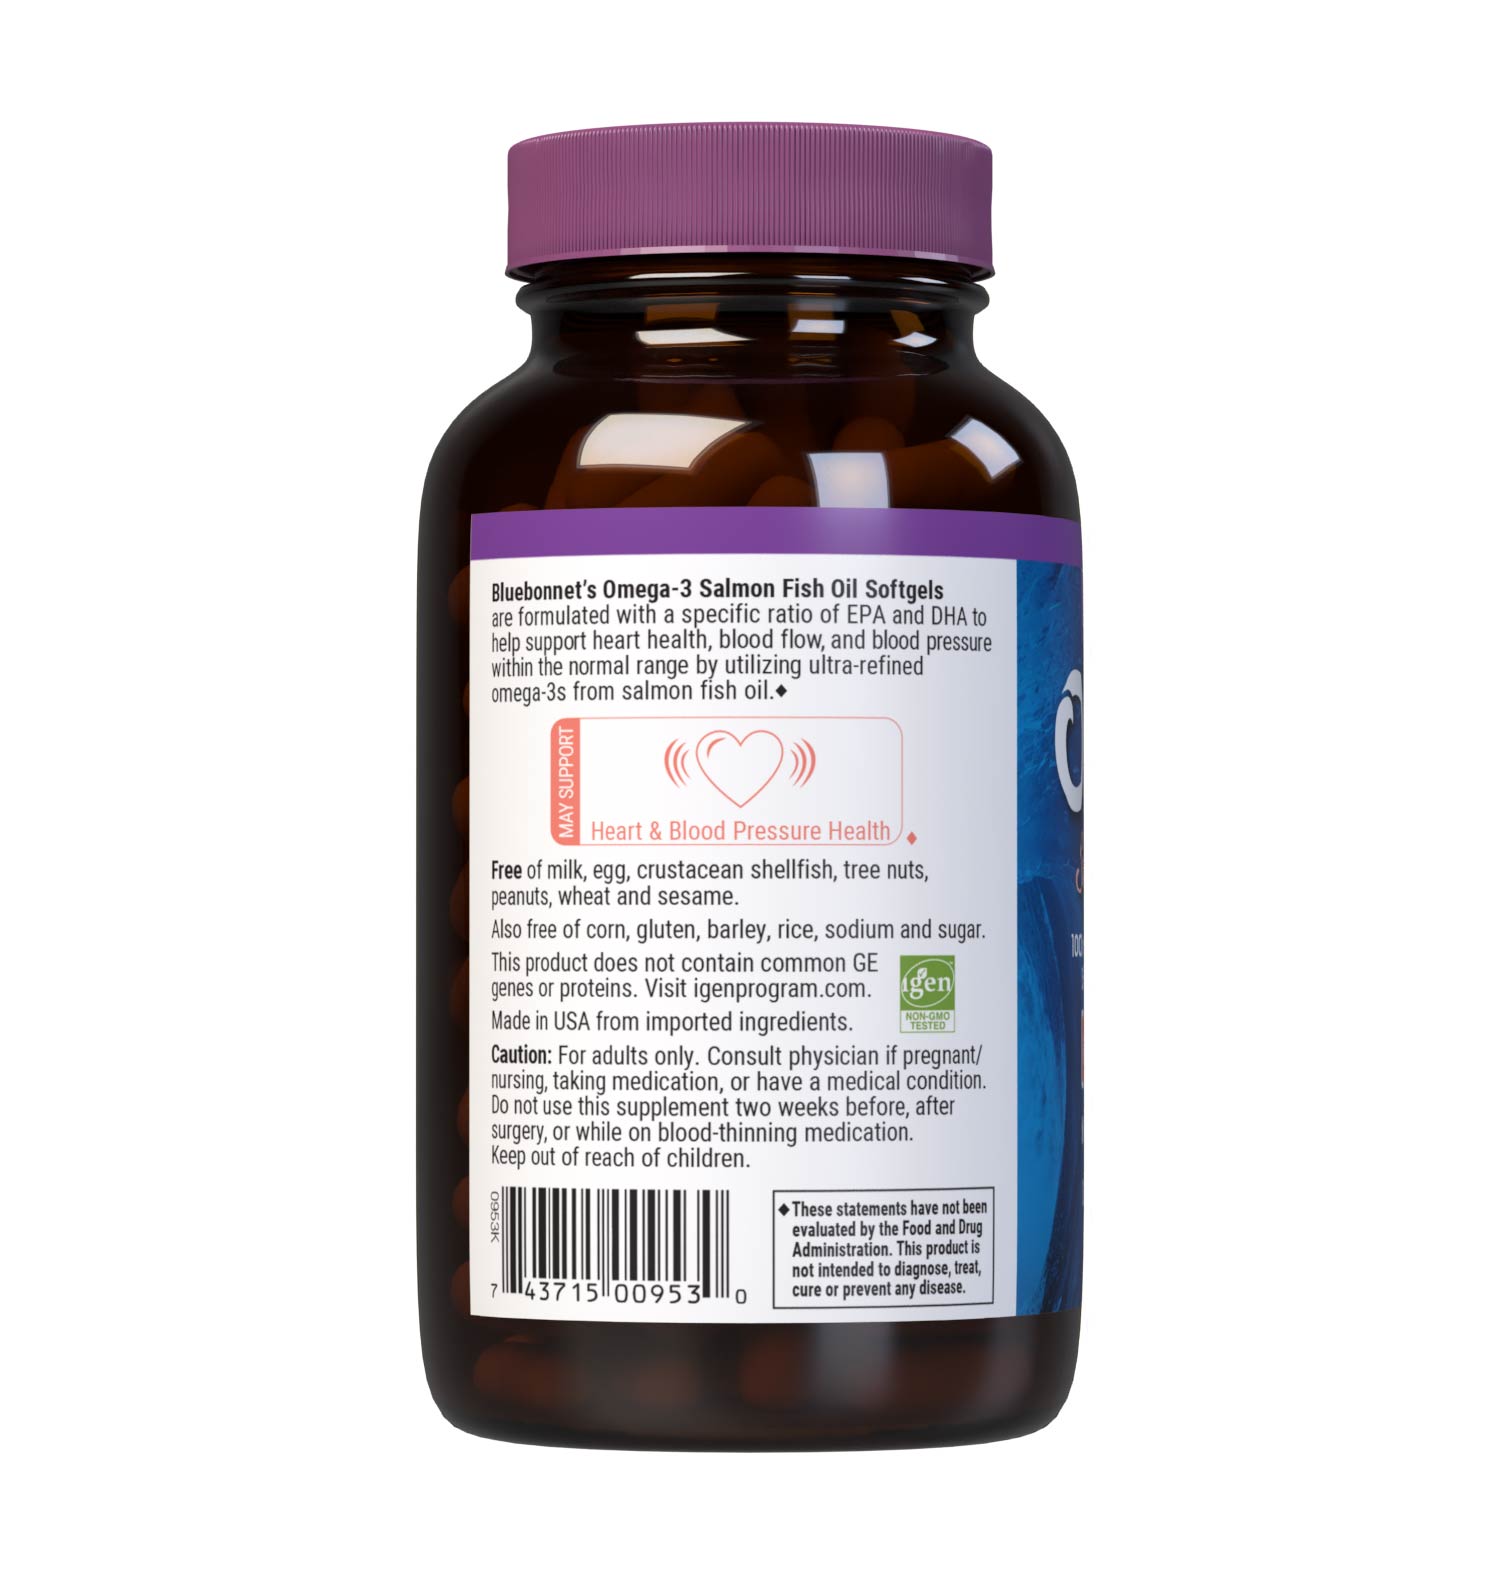 Bluebonnet’s Omega-3 Salmon Oil 180 Softgels are formulated with a specific ratio of EPA and DHA to help support heart health, blood flow, and blood pressure within the normal range by utilizing ultra-refined omega 3-s from salmon fish oil. Description panel. #size_180 count